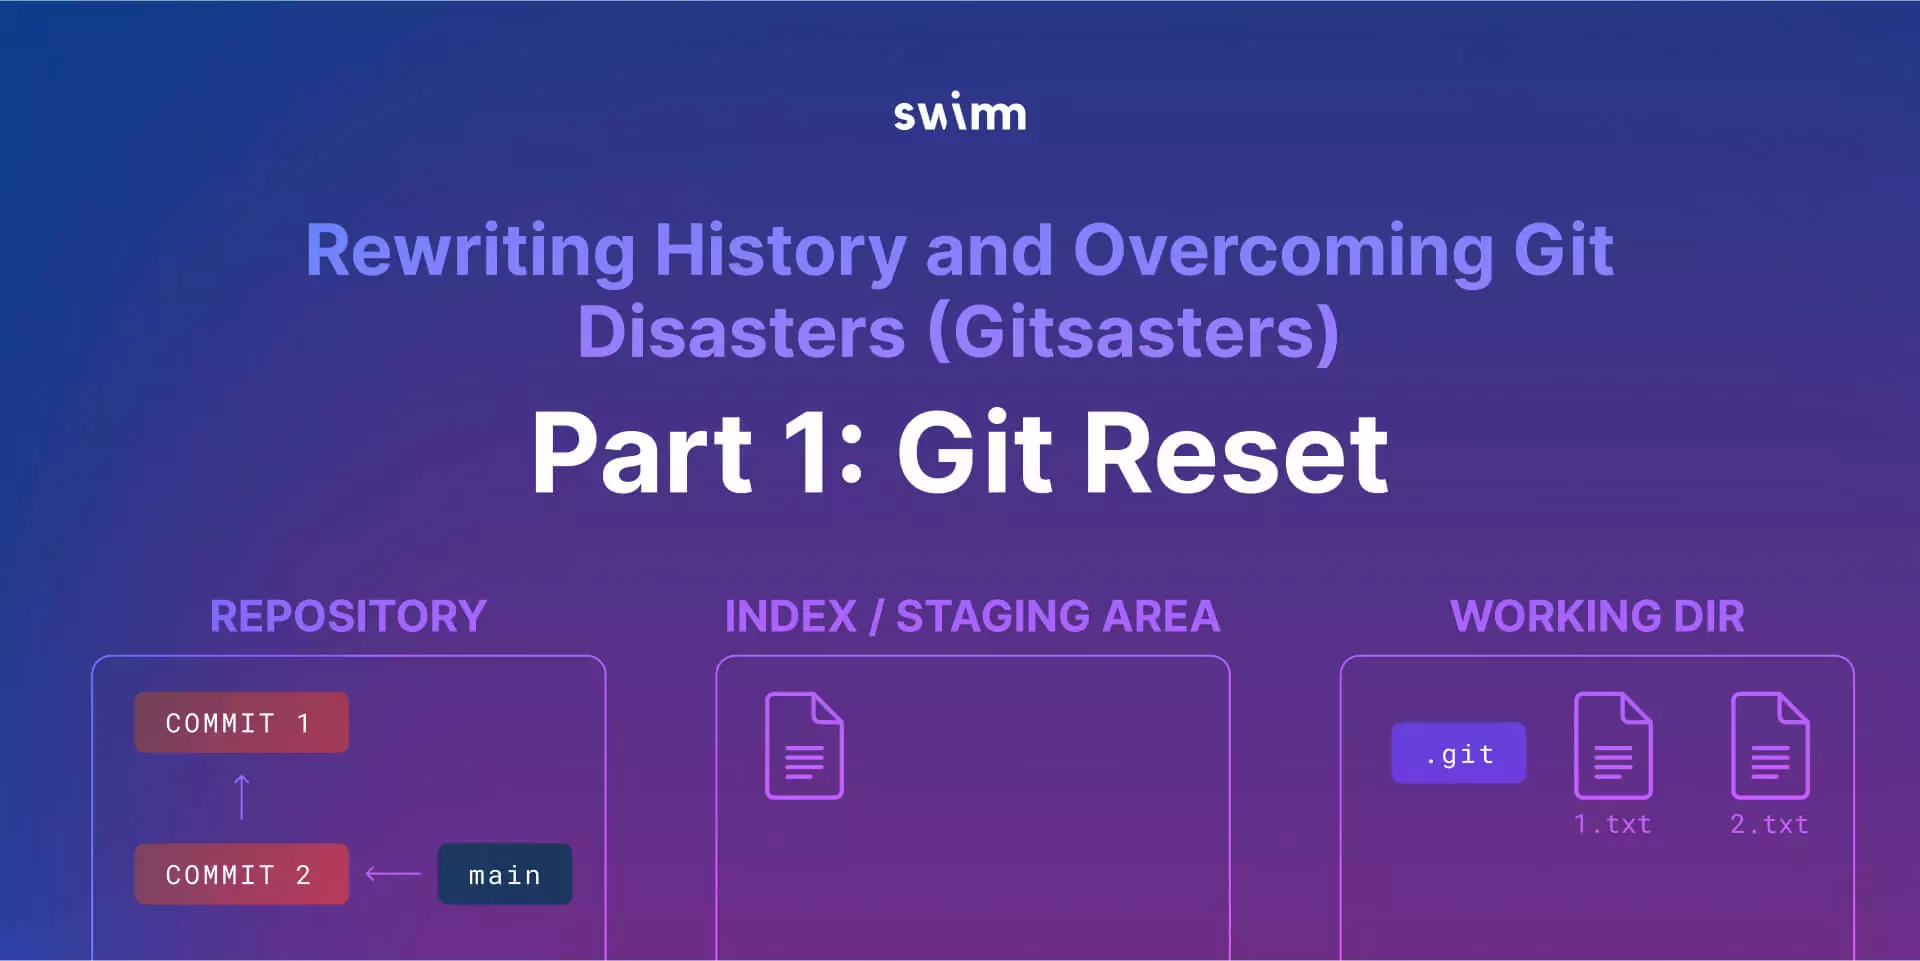 Rewriting history and overcoming Git disasters (Gitsasters) part 1: Git reset cover image